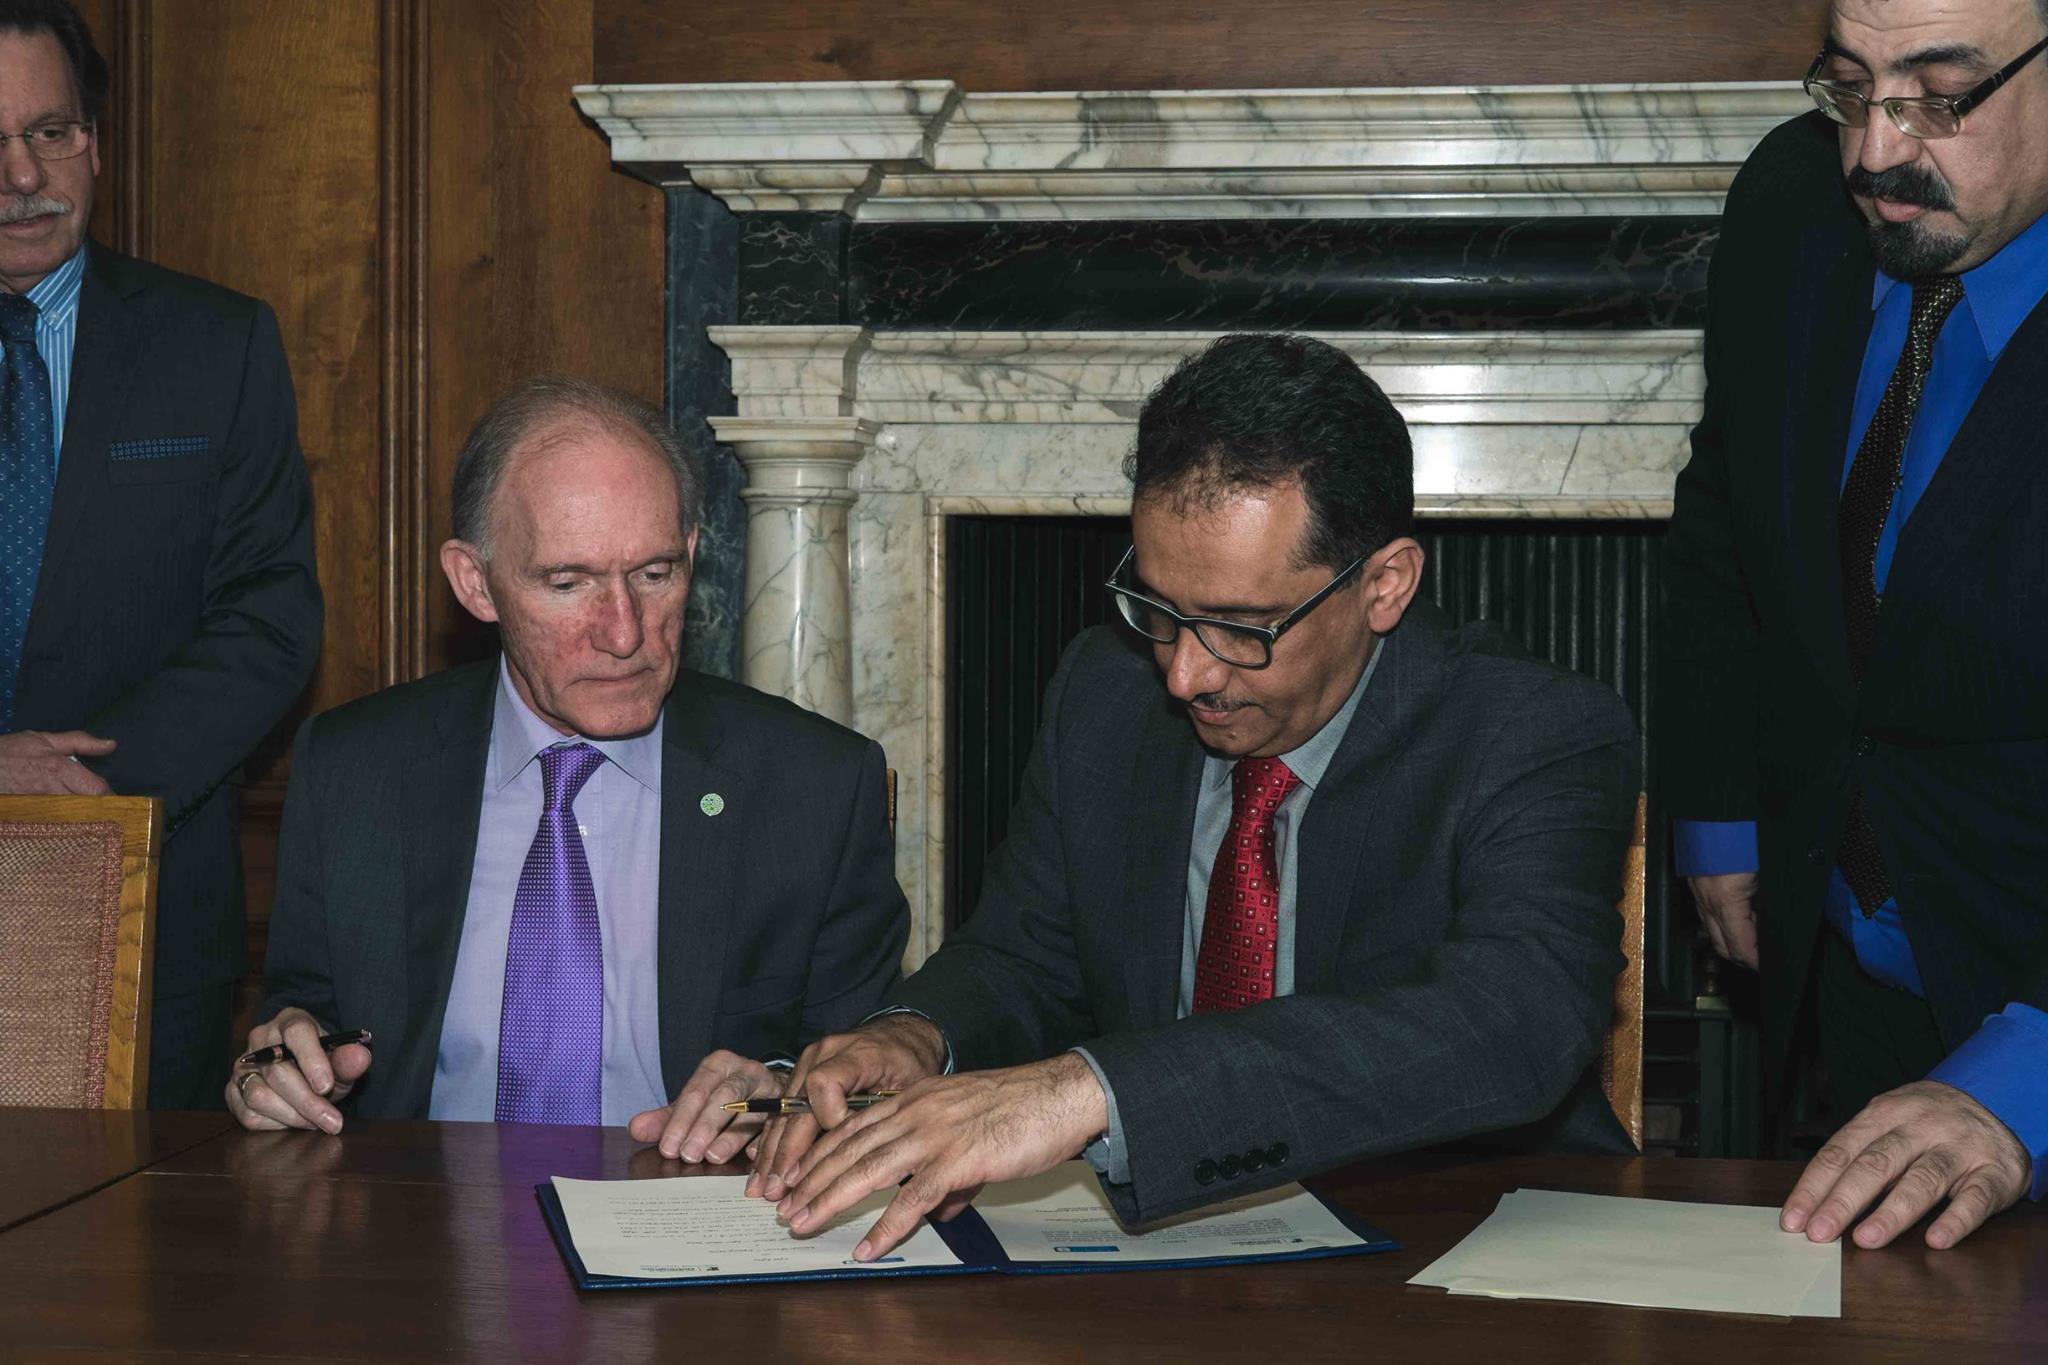 signing ceremony of an agreement between KSU and The University of Nottingham